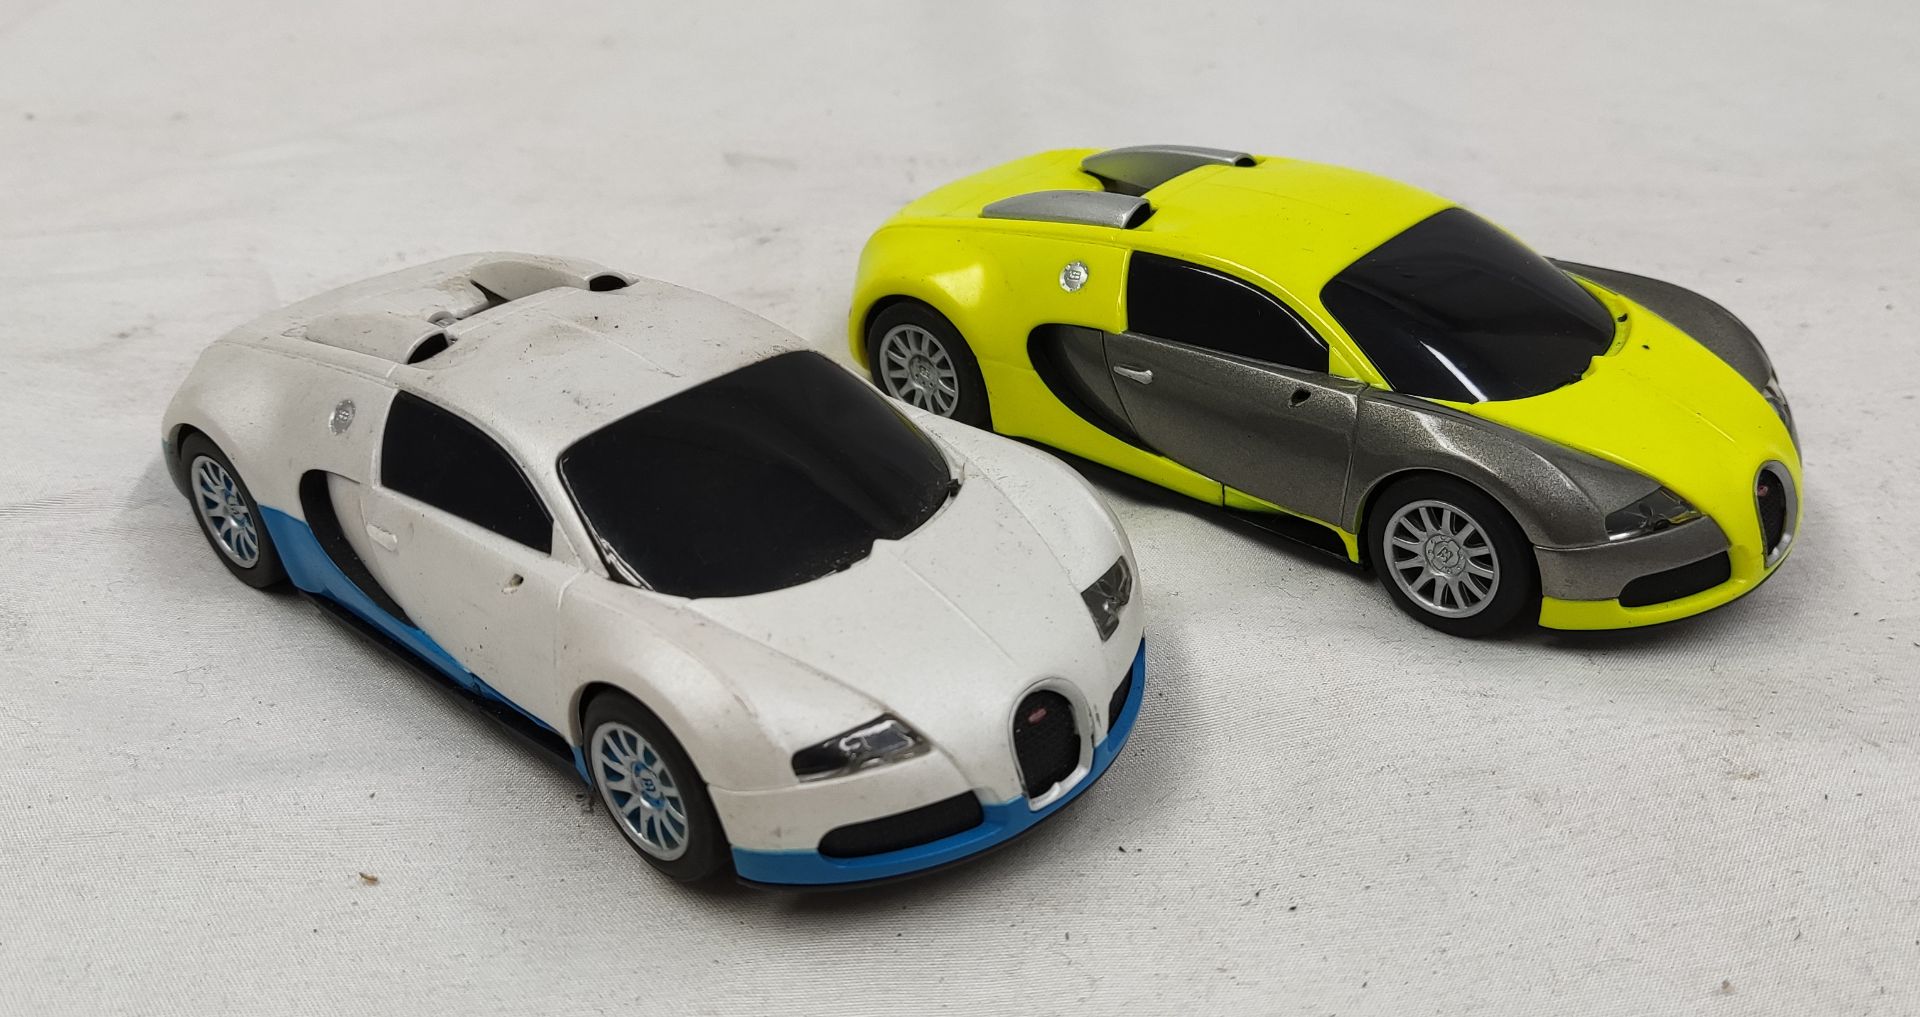 2 x Scalextric Bugatti Cars - Tested and Working - Used - CL444 - NO VAT ON THE HAMMER - Location: